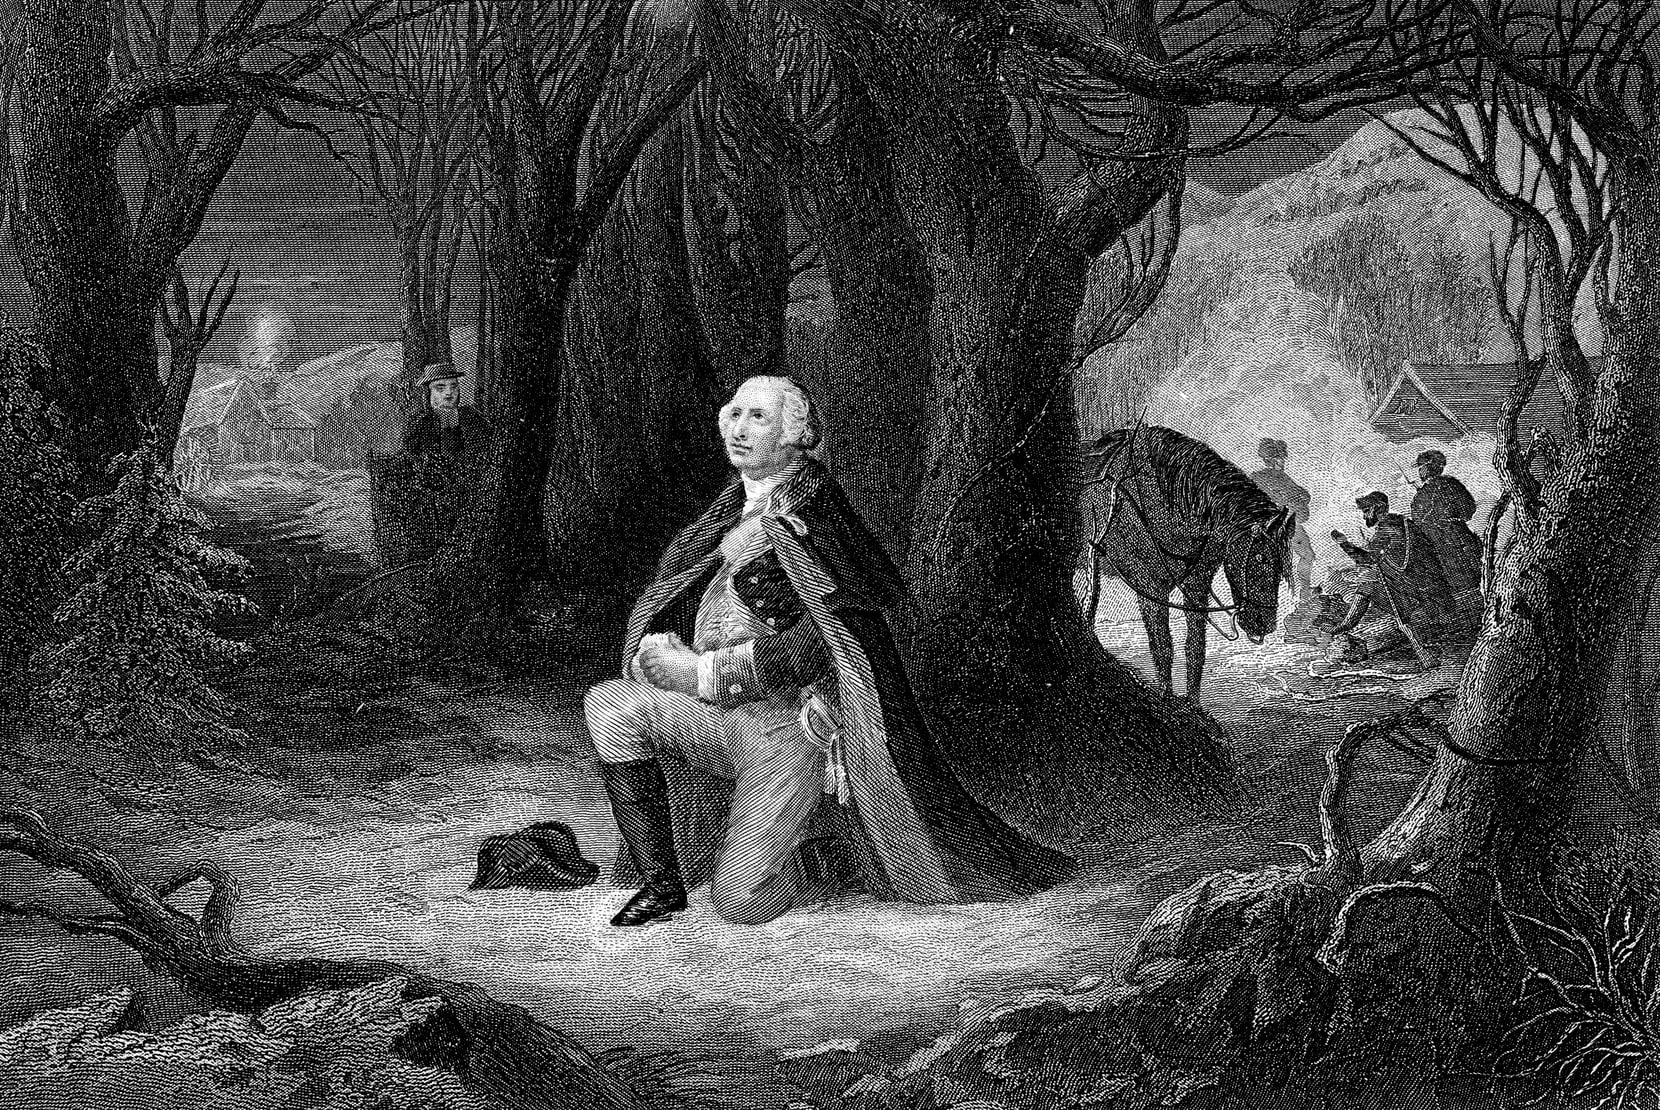 Engraving From 1882 Of George Washington Praying At Valley Forge During The American...